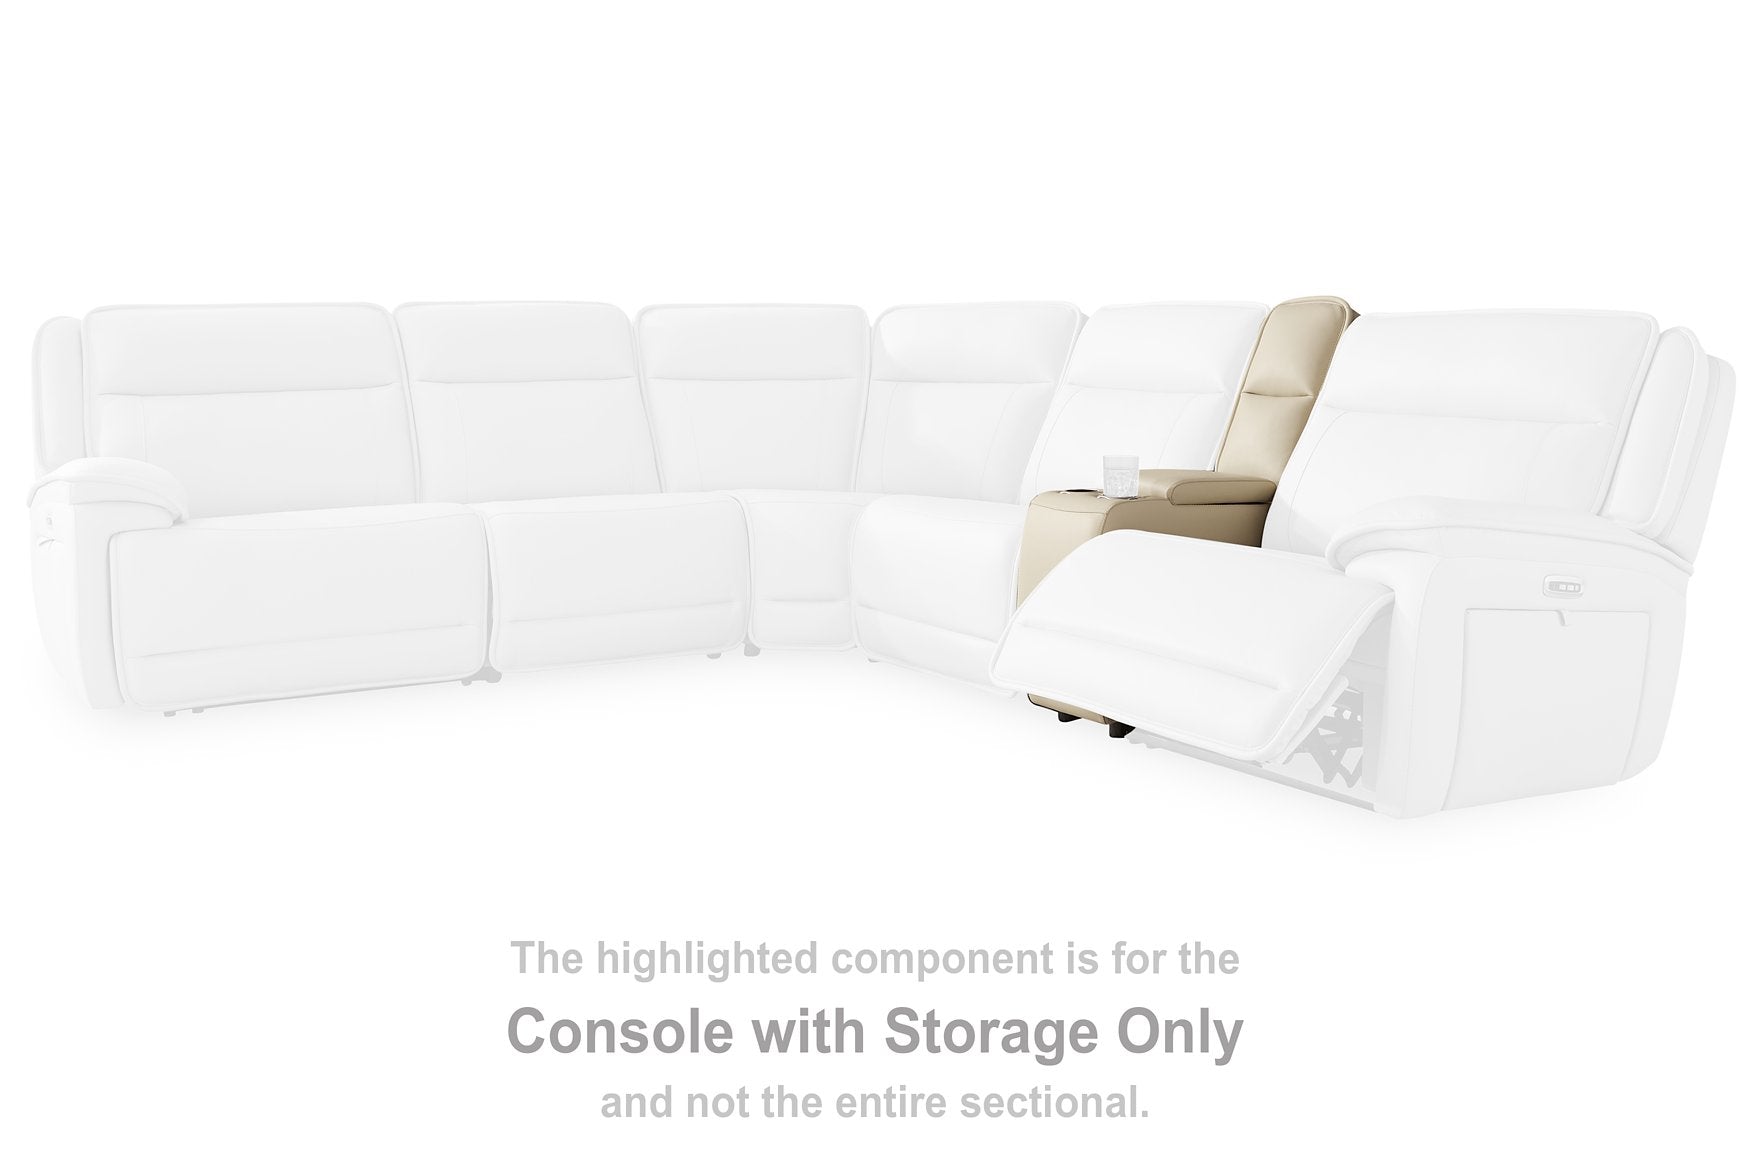 Double Deal Power Reclining Loveseat Sectional with Console - Half Price Furniture